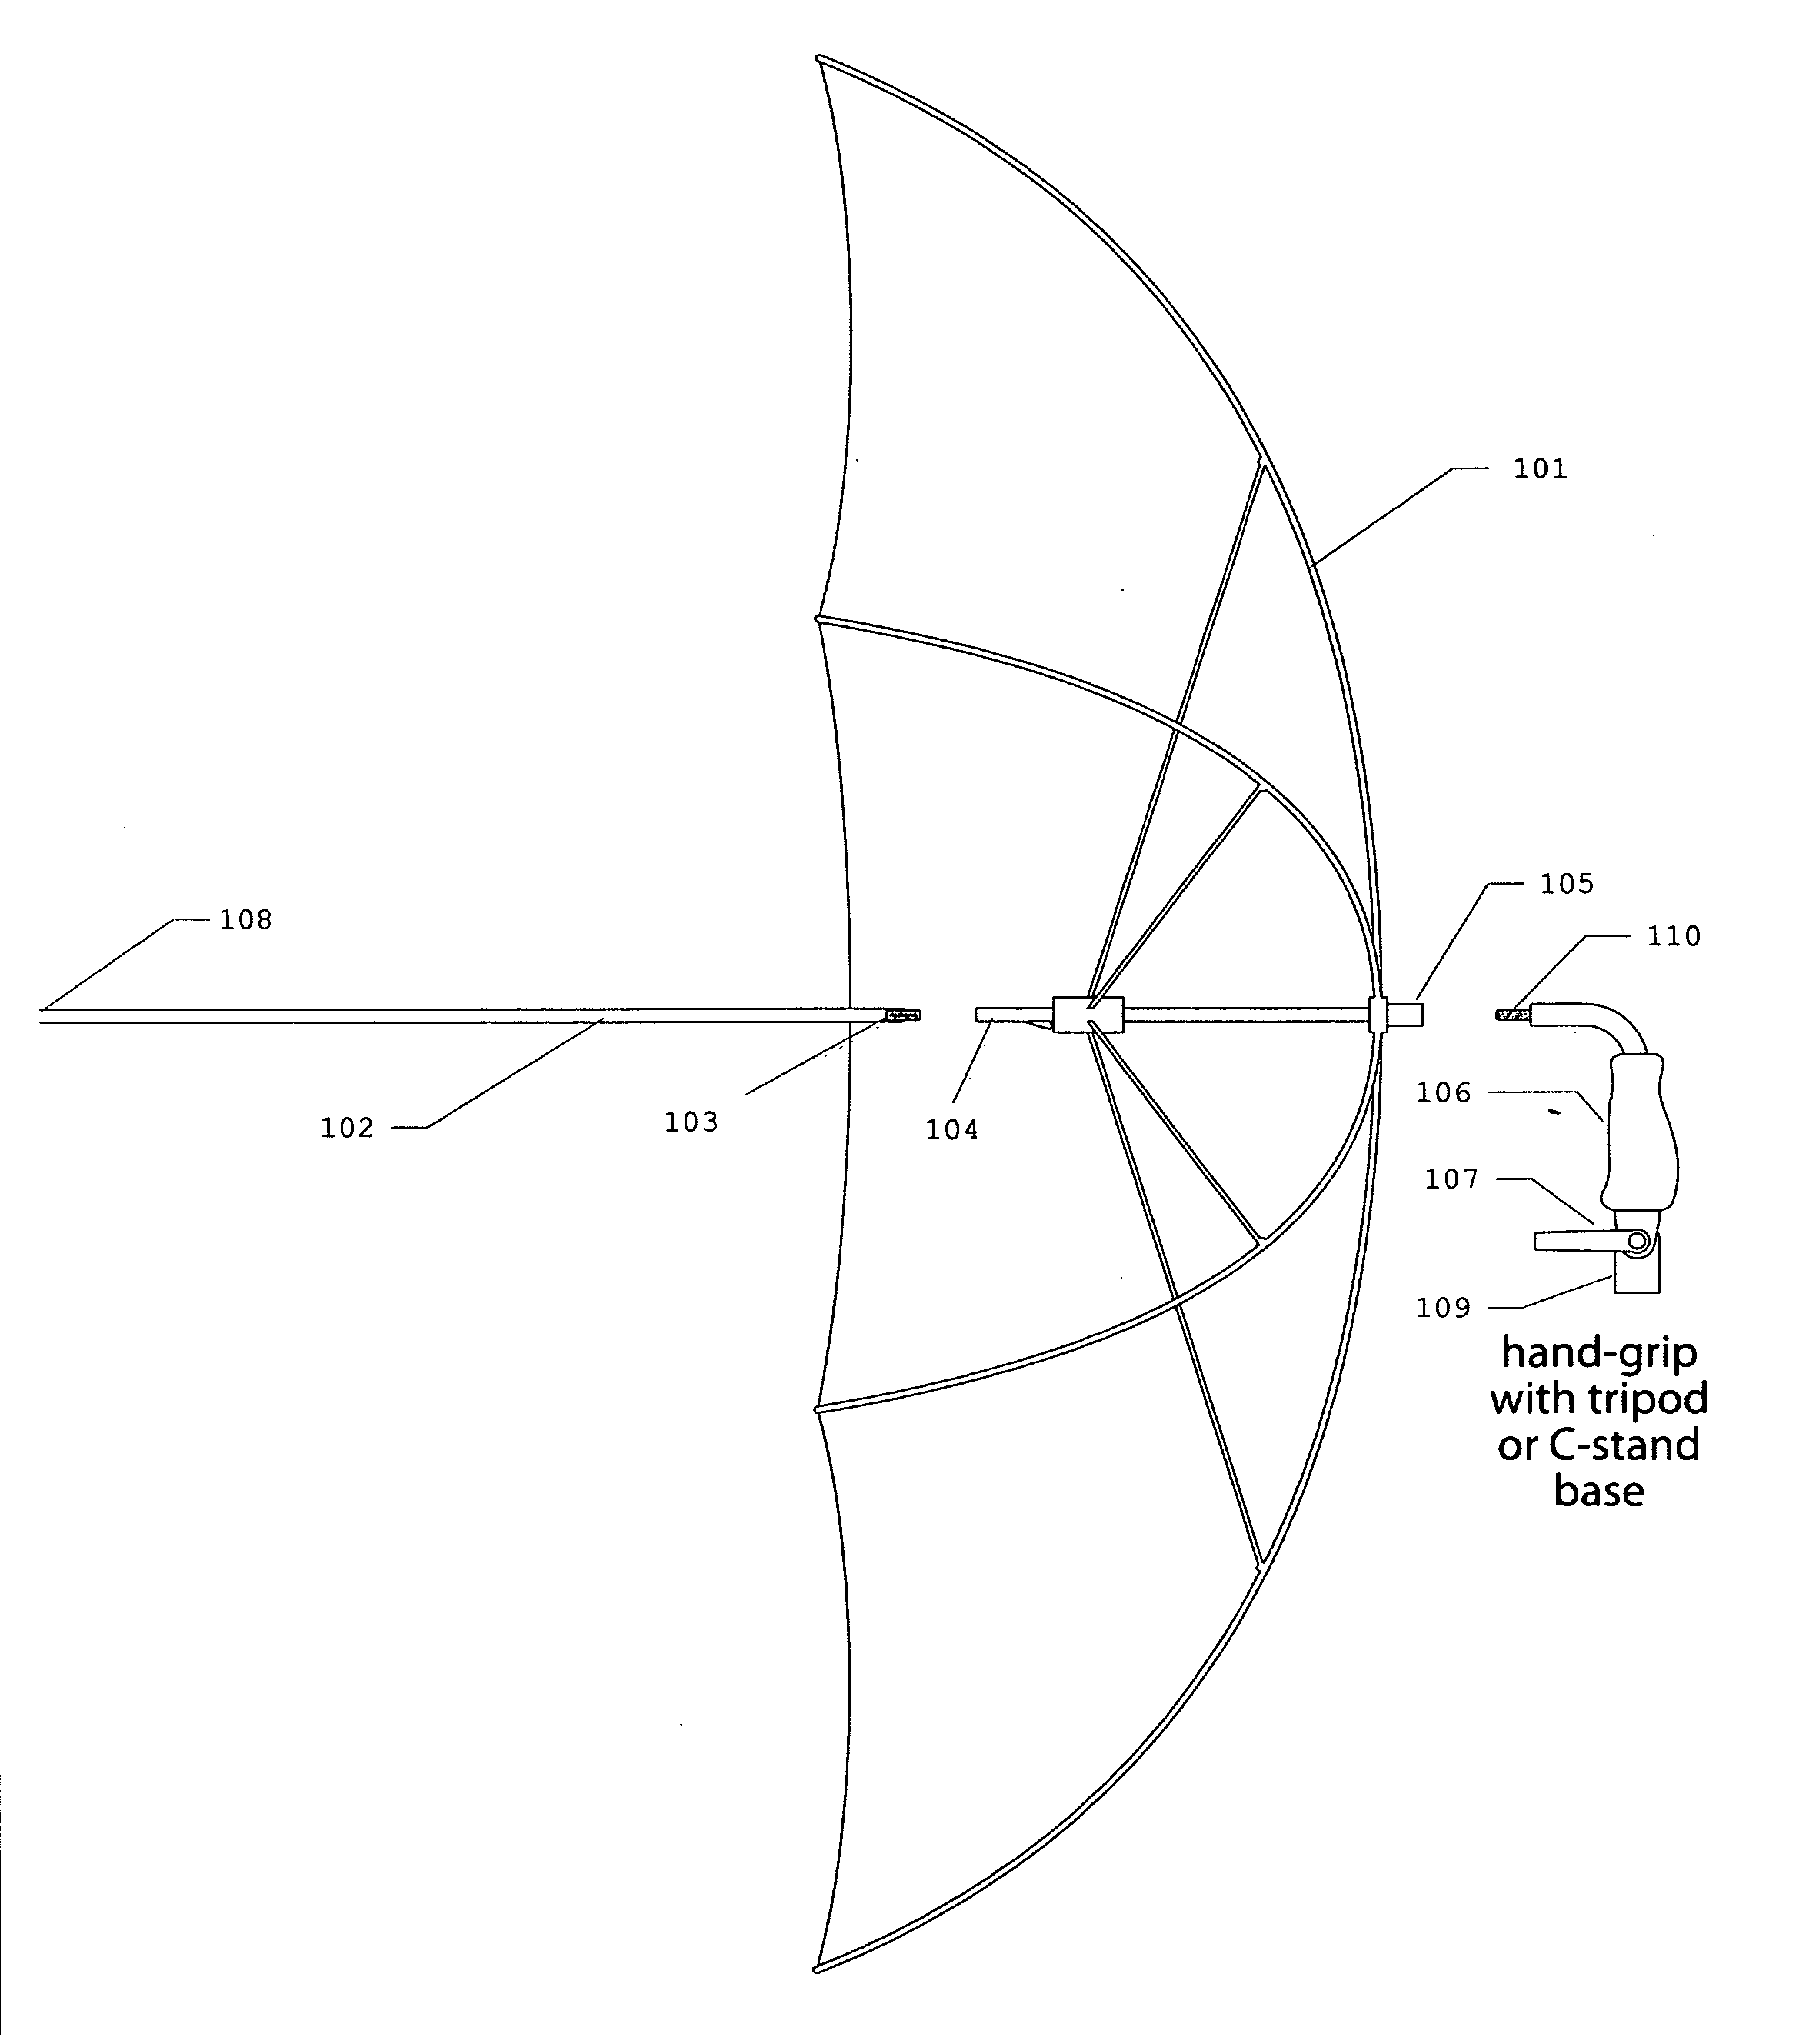 Apparatus to provide a multi-purpose reflective umbrella and lighting enhancement device for the purposes of providing illumination during still, motion, and video photography.